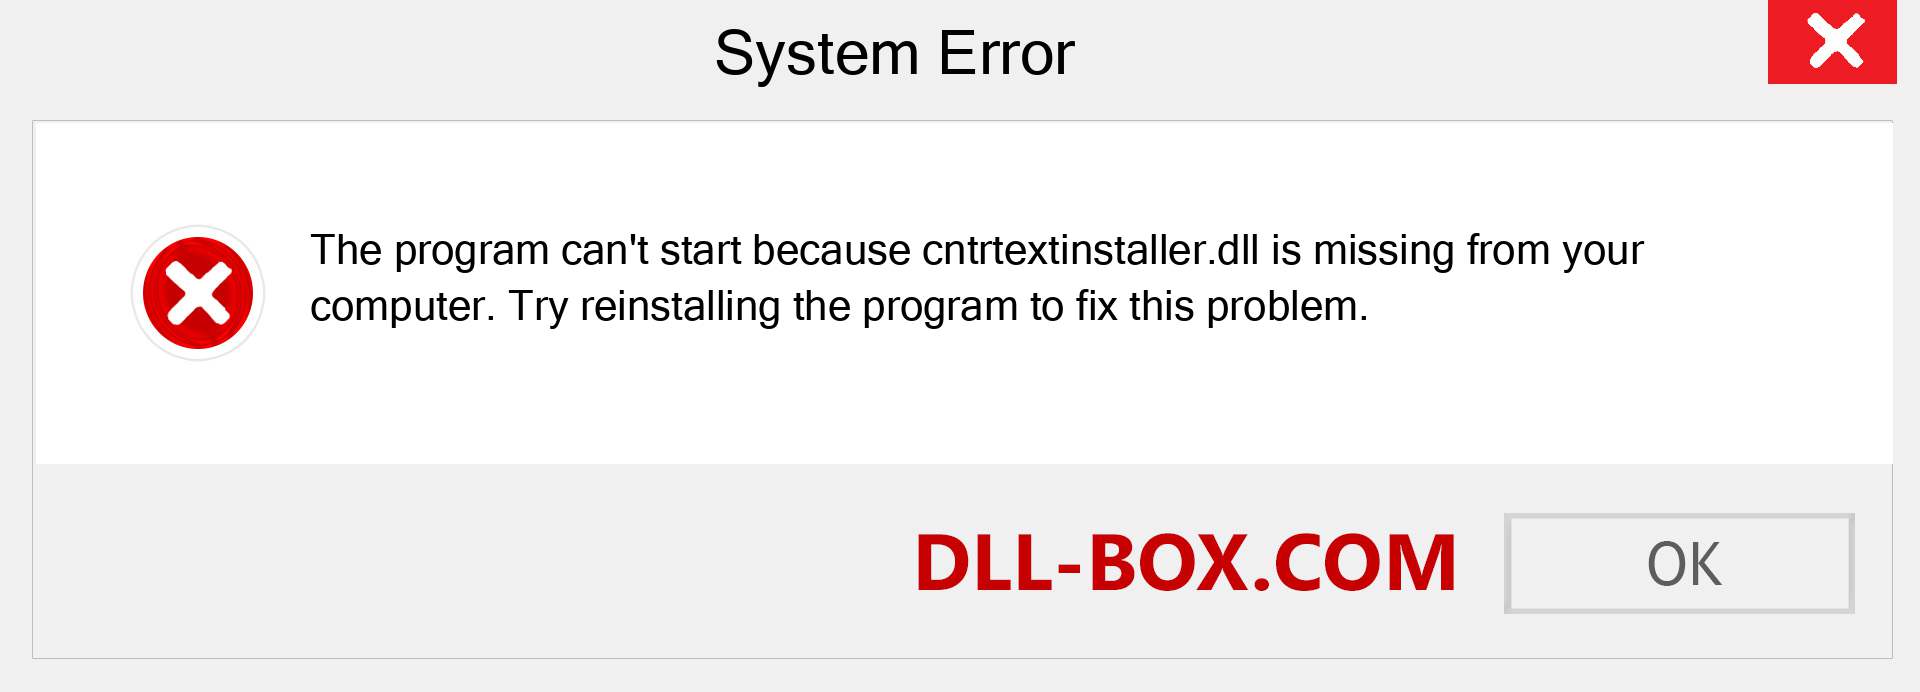  cntrtextinstaller.dll file is missing?. Download for Windows 7, 8, 10 - Fix  cntrtextinstaller dll Missing Error on Windows, photos, images